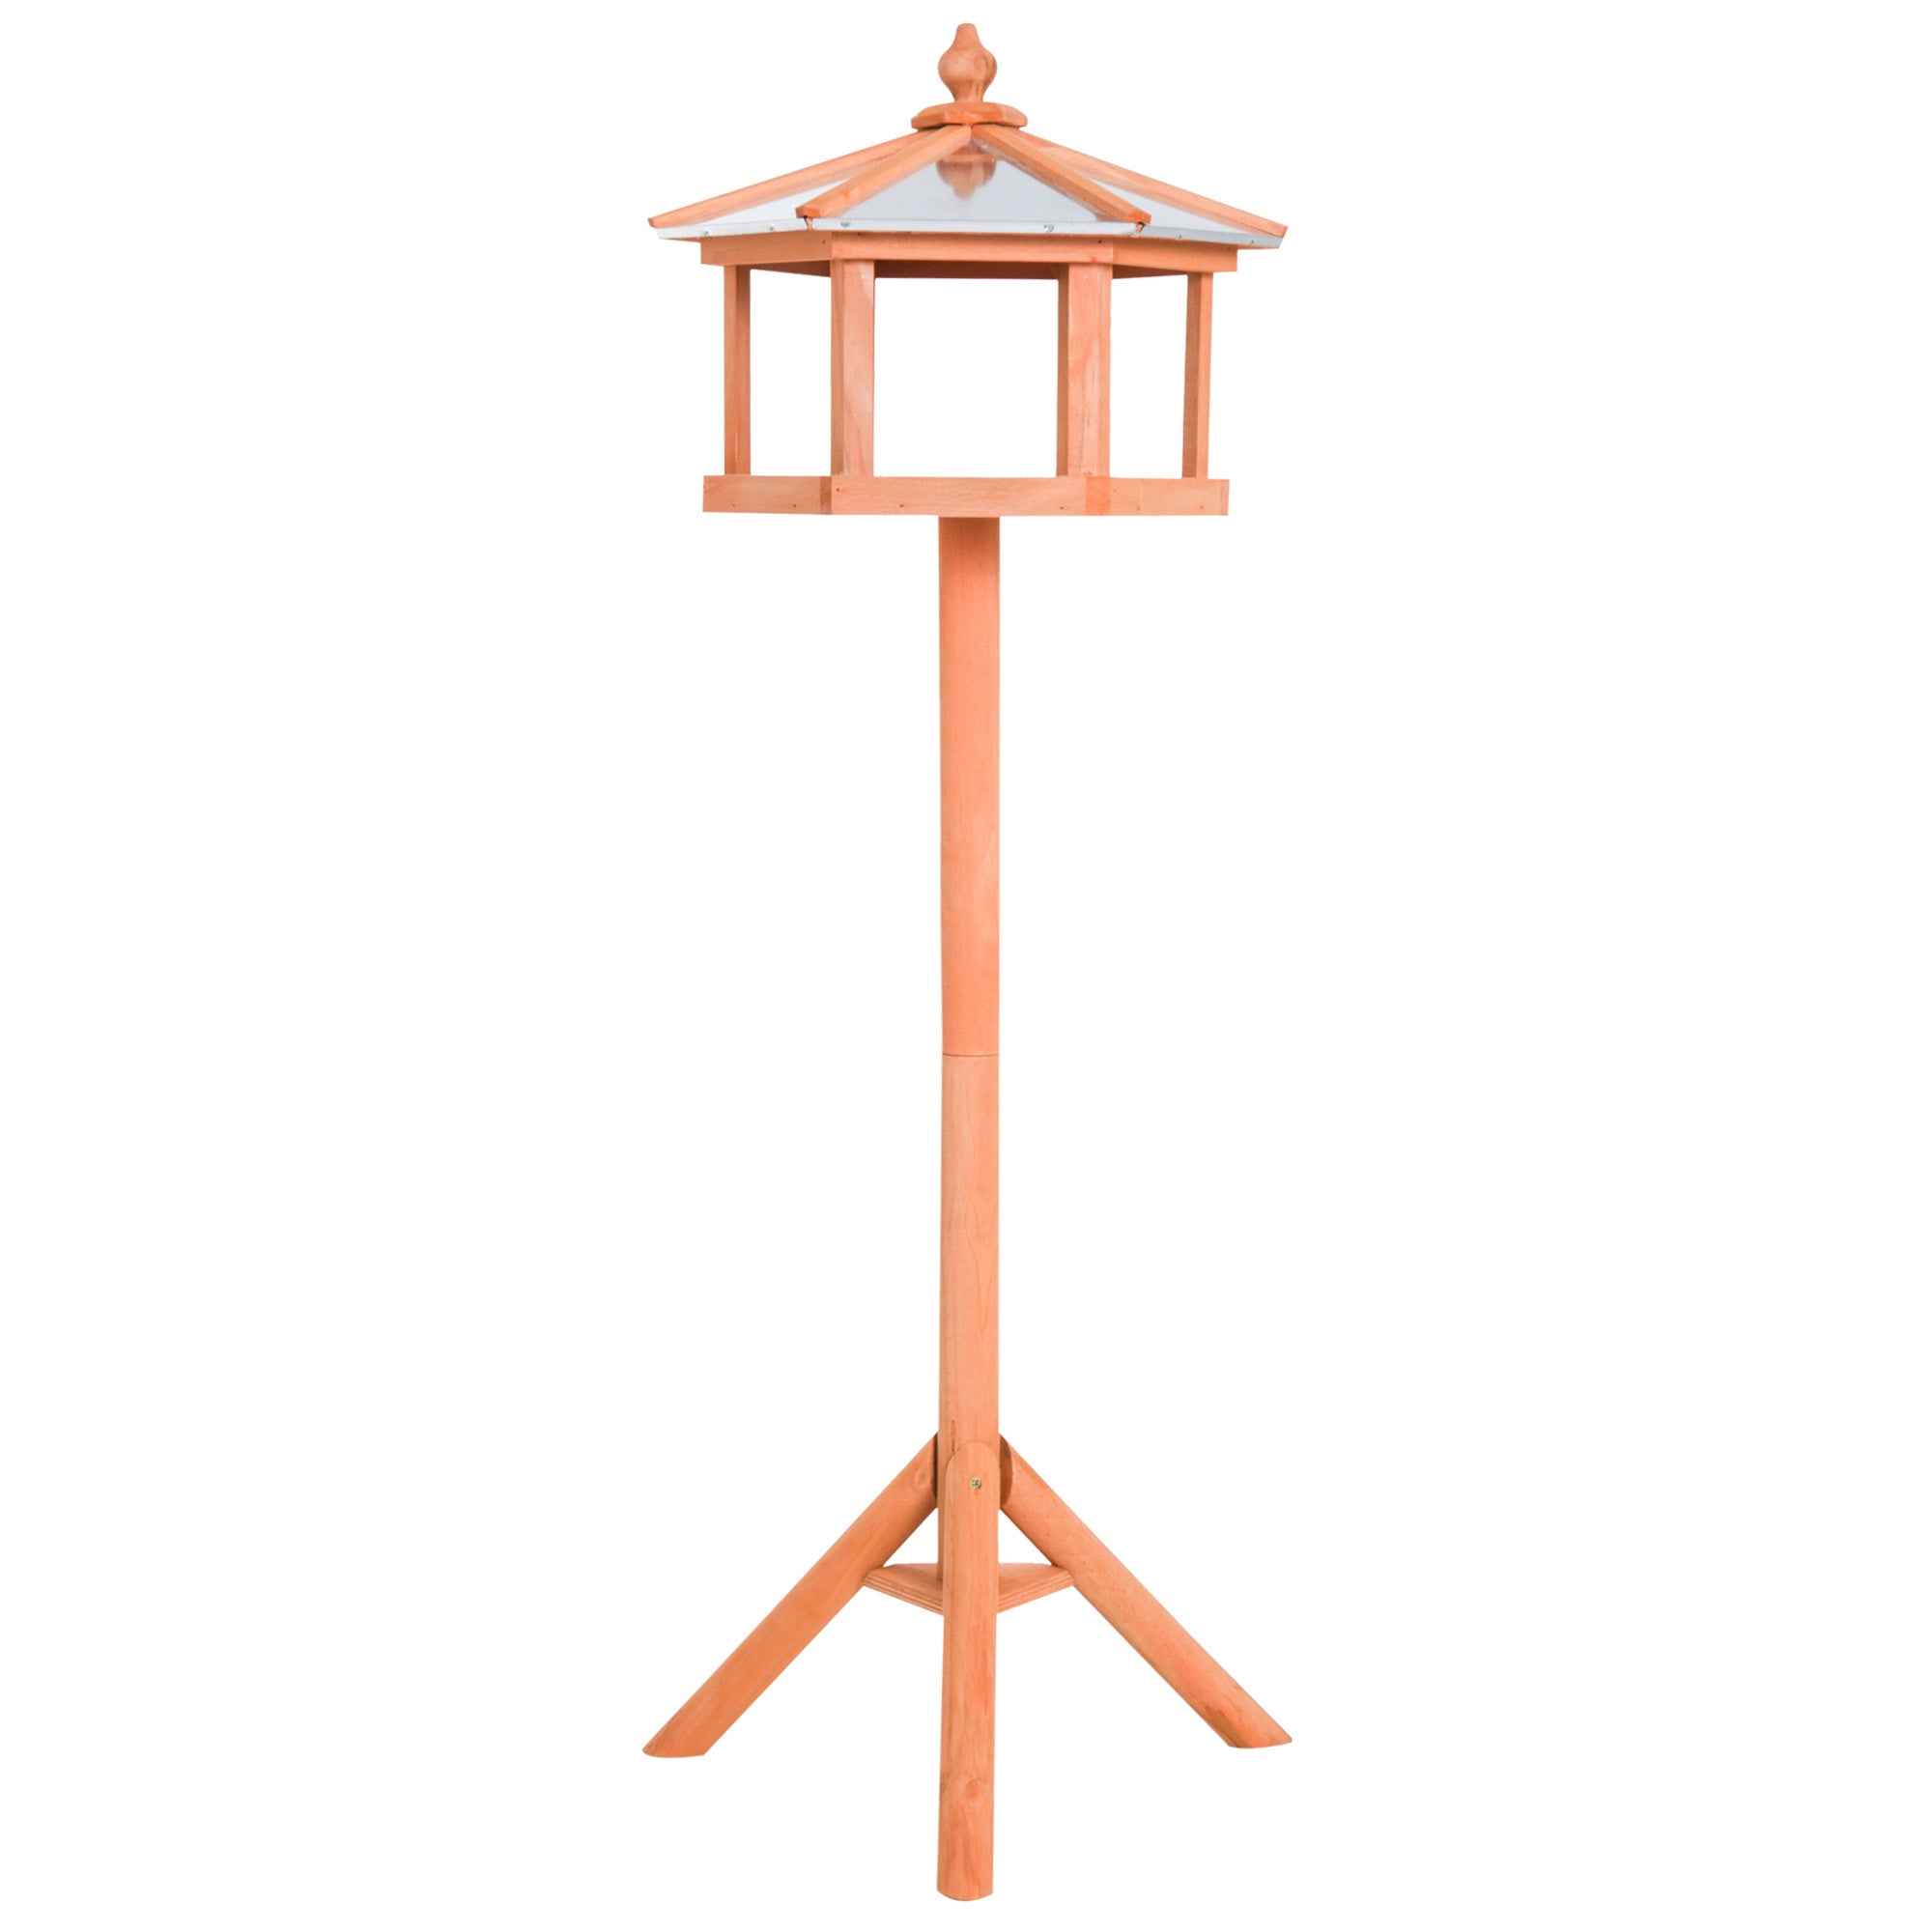 Deluxe Bird Stand Feeder Table Feeding Station Wooden Garden Wood Coop Parrot Stand 113cm High New-0